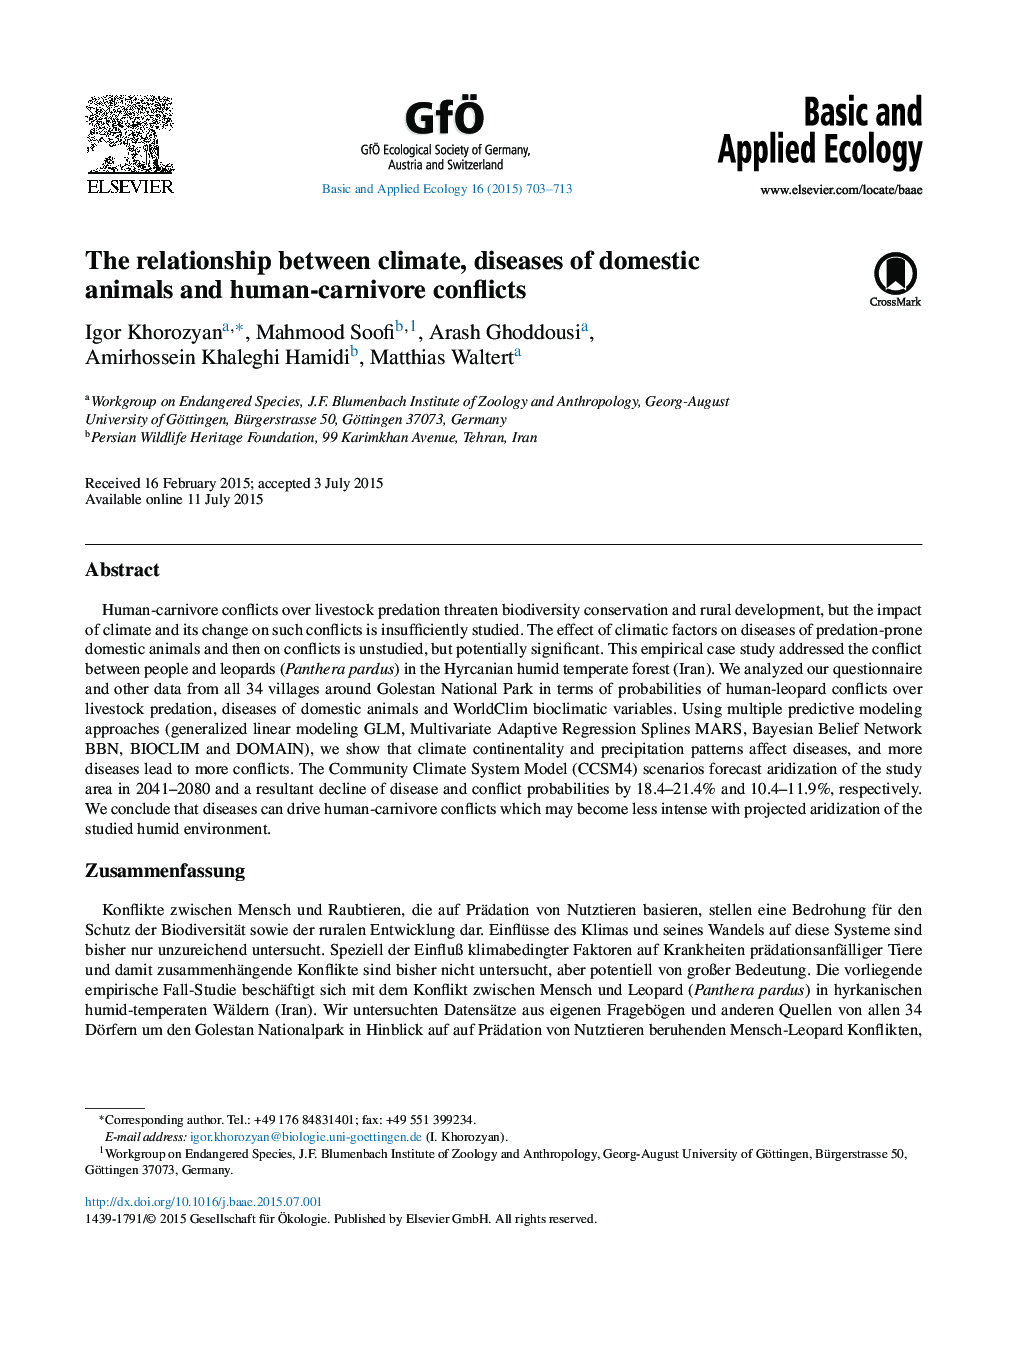 The relationship between climate, diseases of domestic animals and human-carnivore conflicts